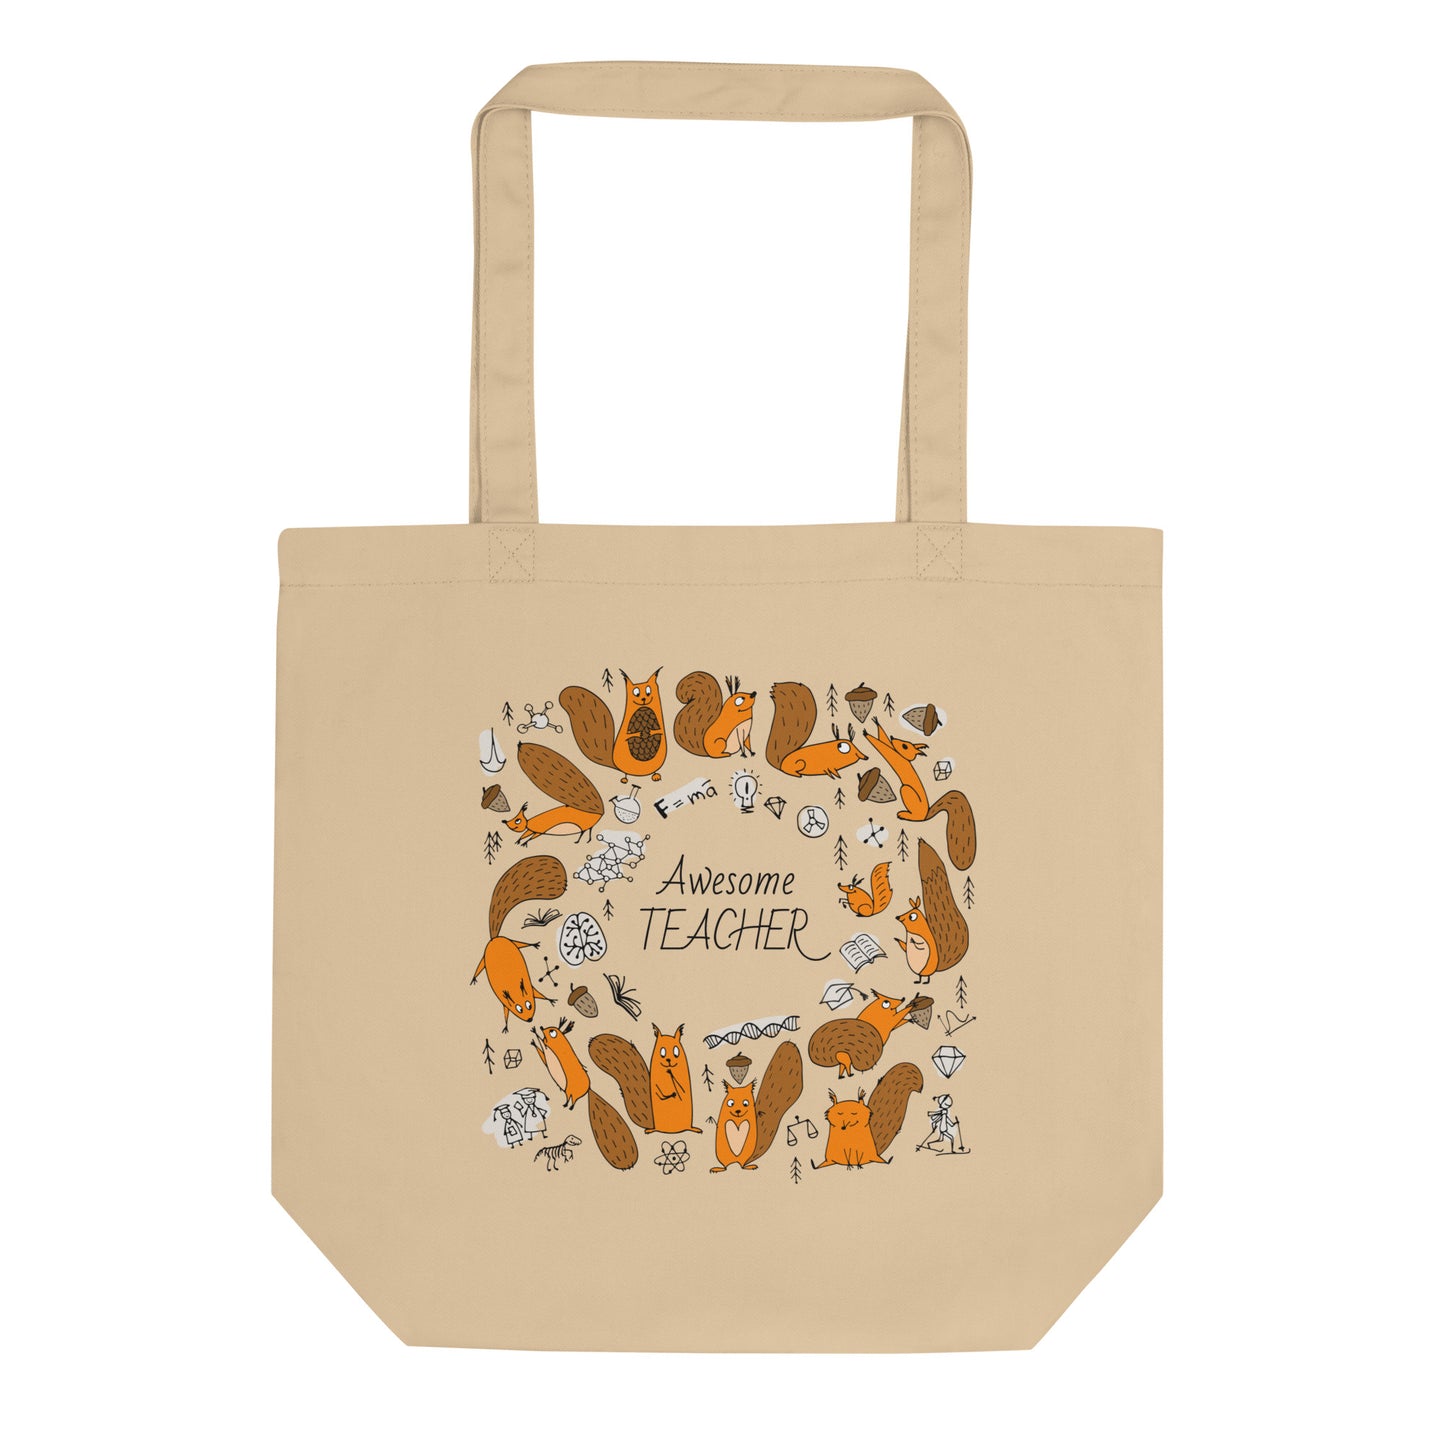 Science-themed eco tote bag with funny science squirrels